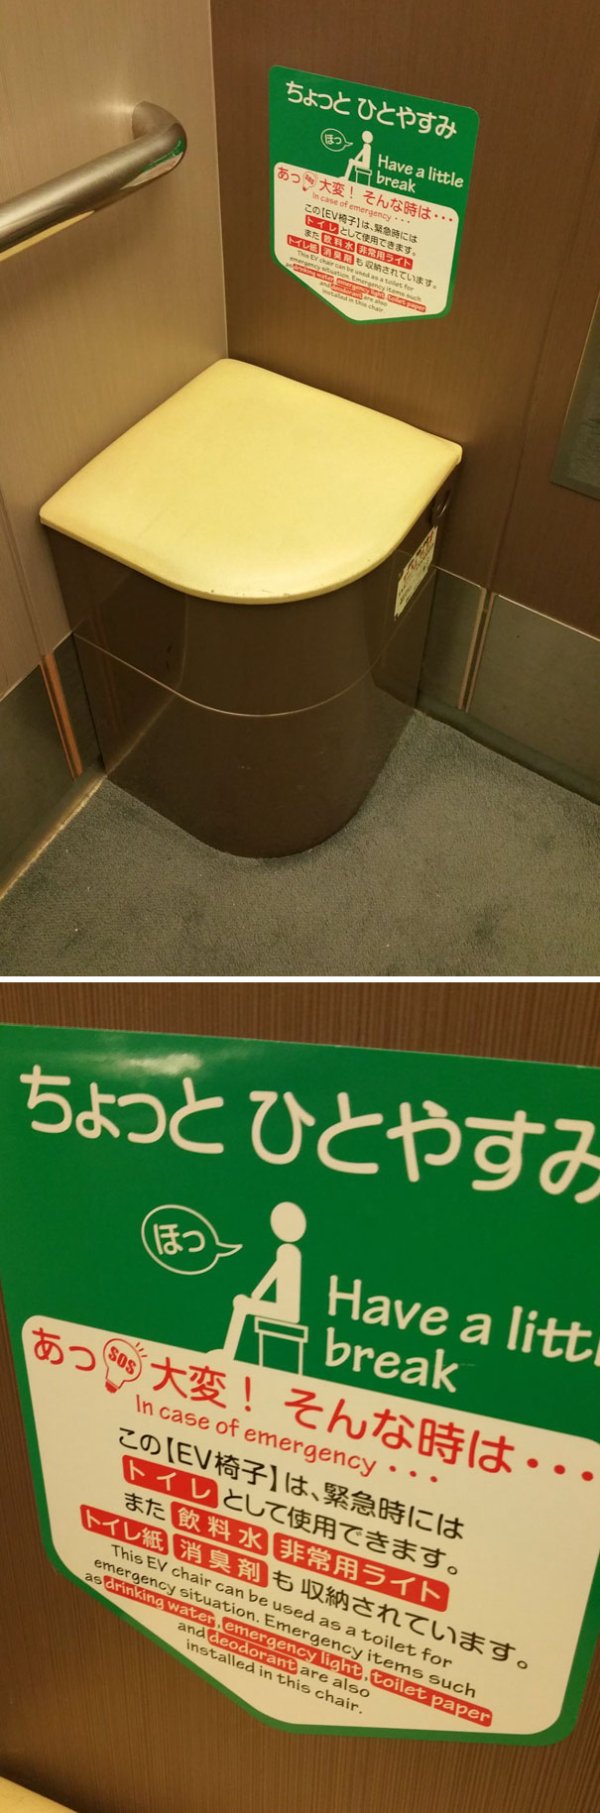 An elevator that has a seat that doubles as a toilet in the case of an emergency.